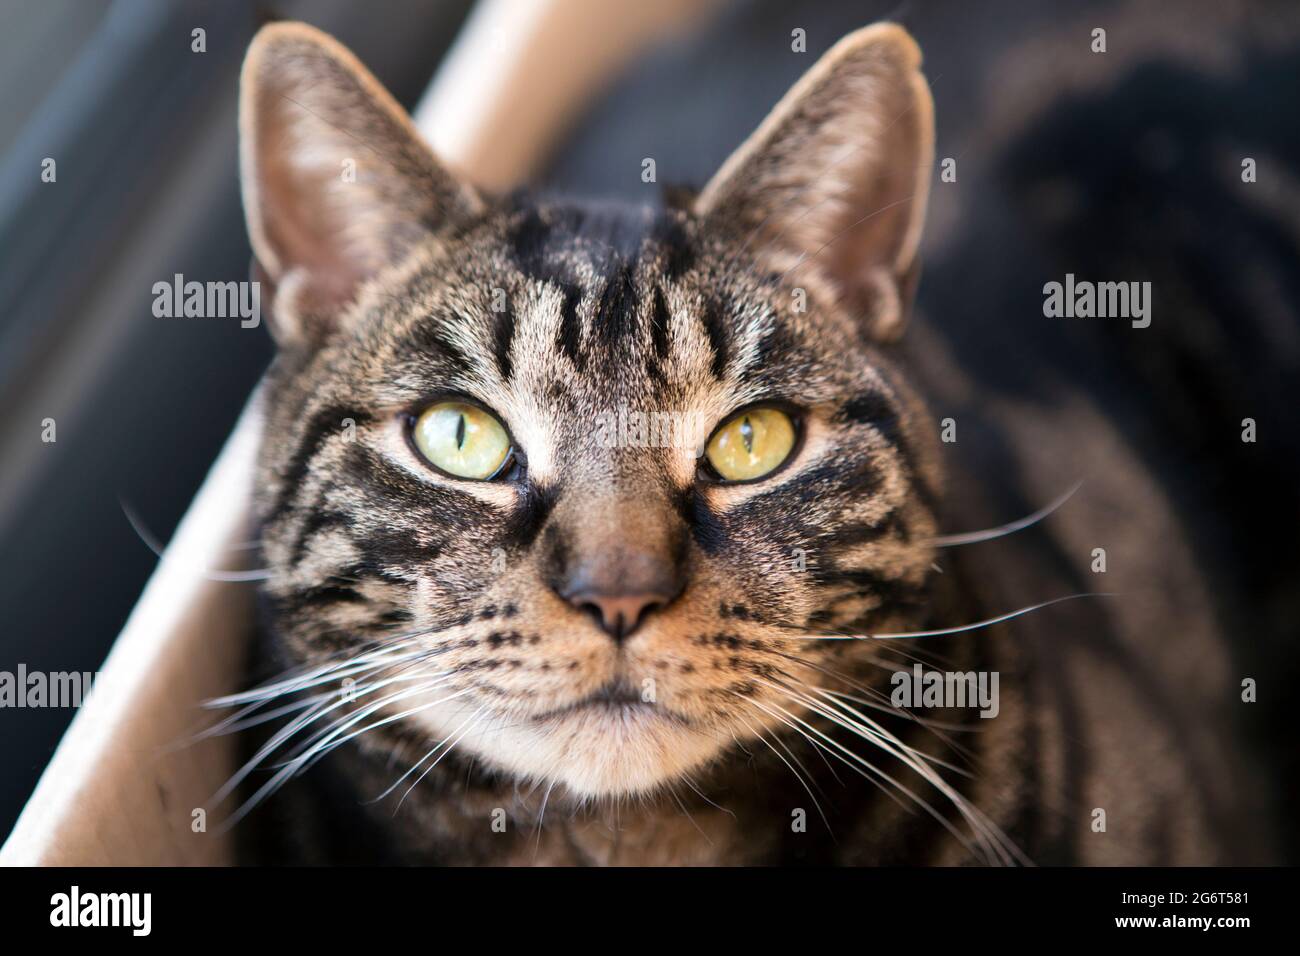 A tabby kitten cat with bright green eyes. Stock Photo